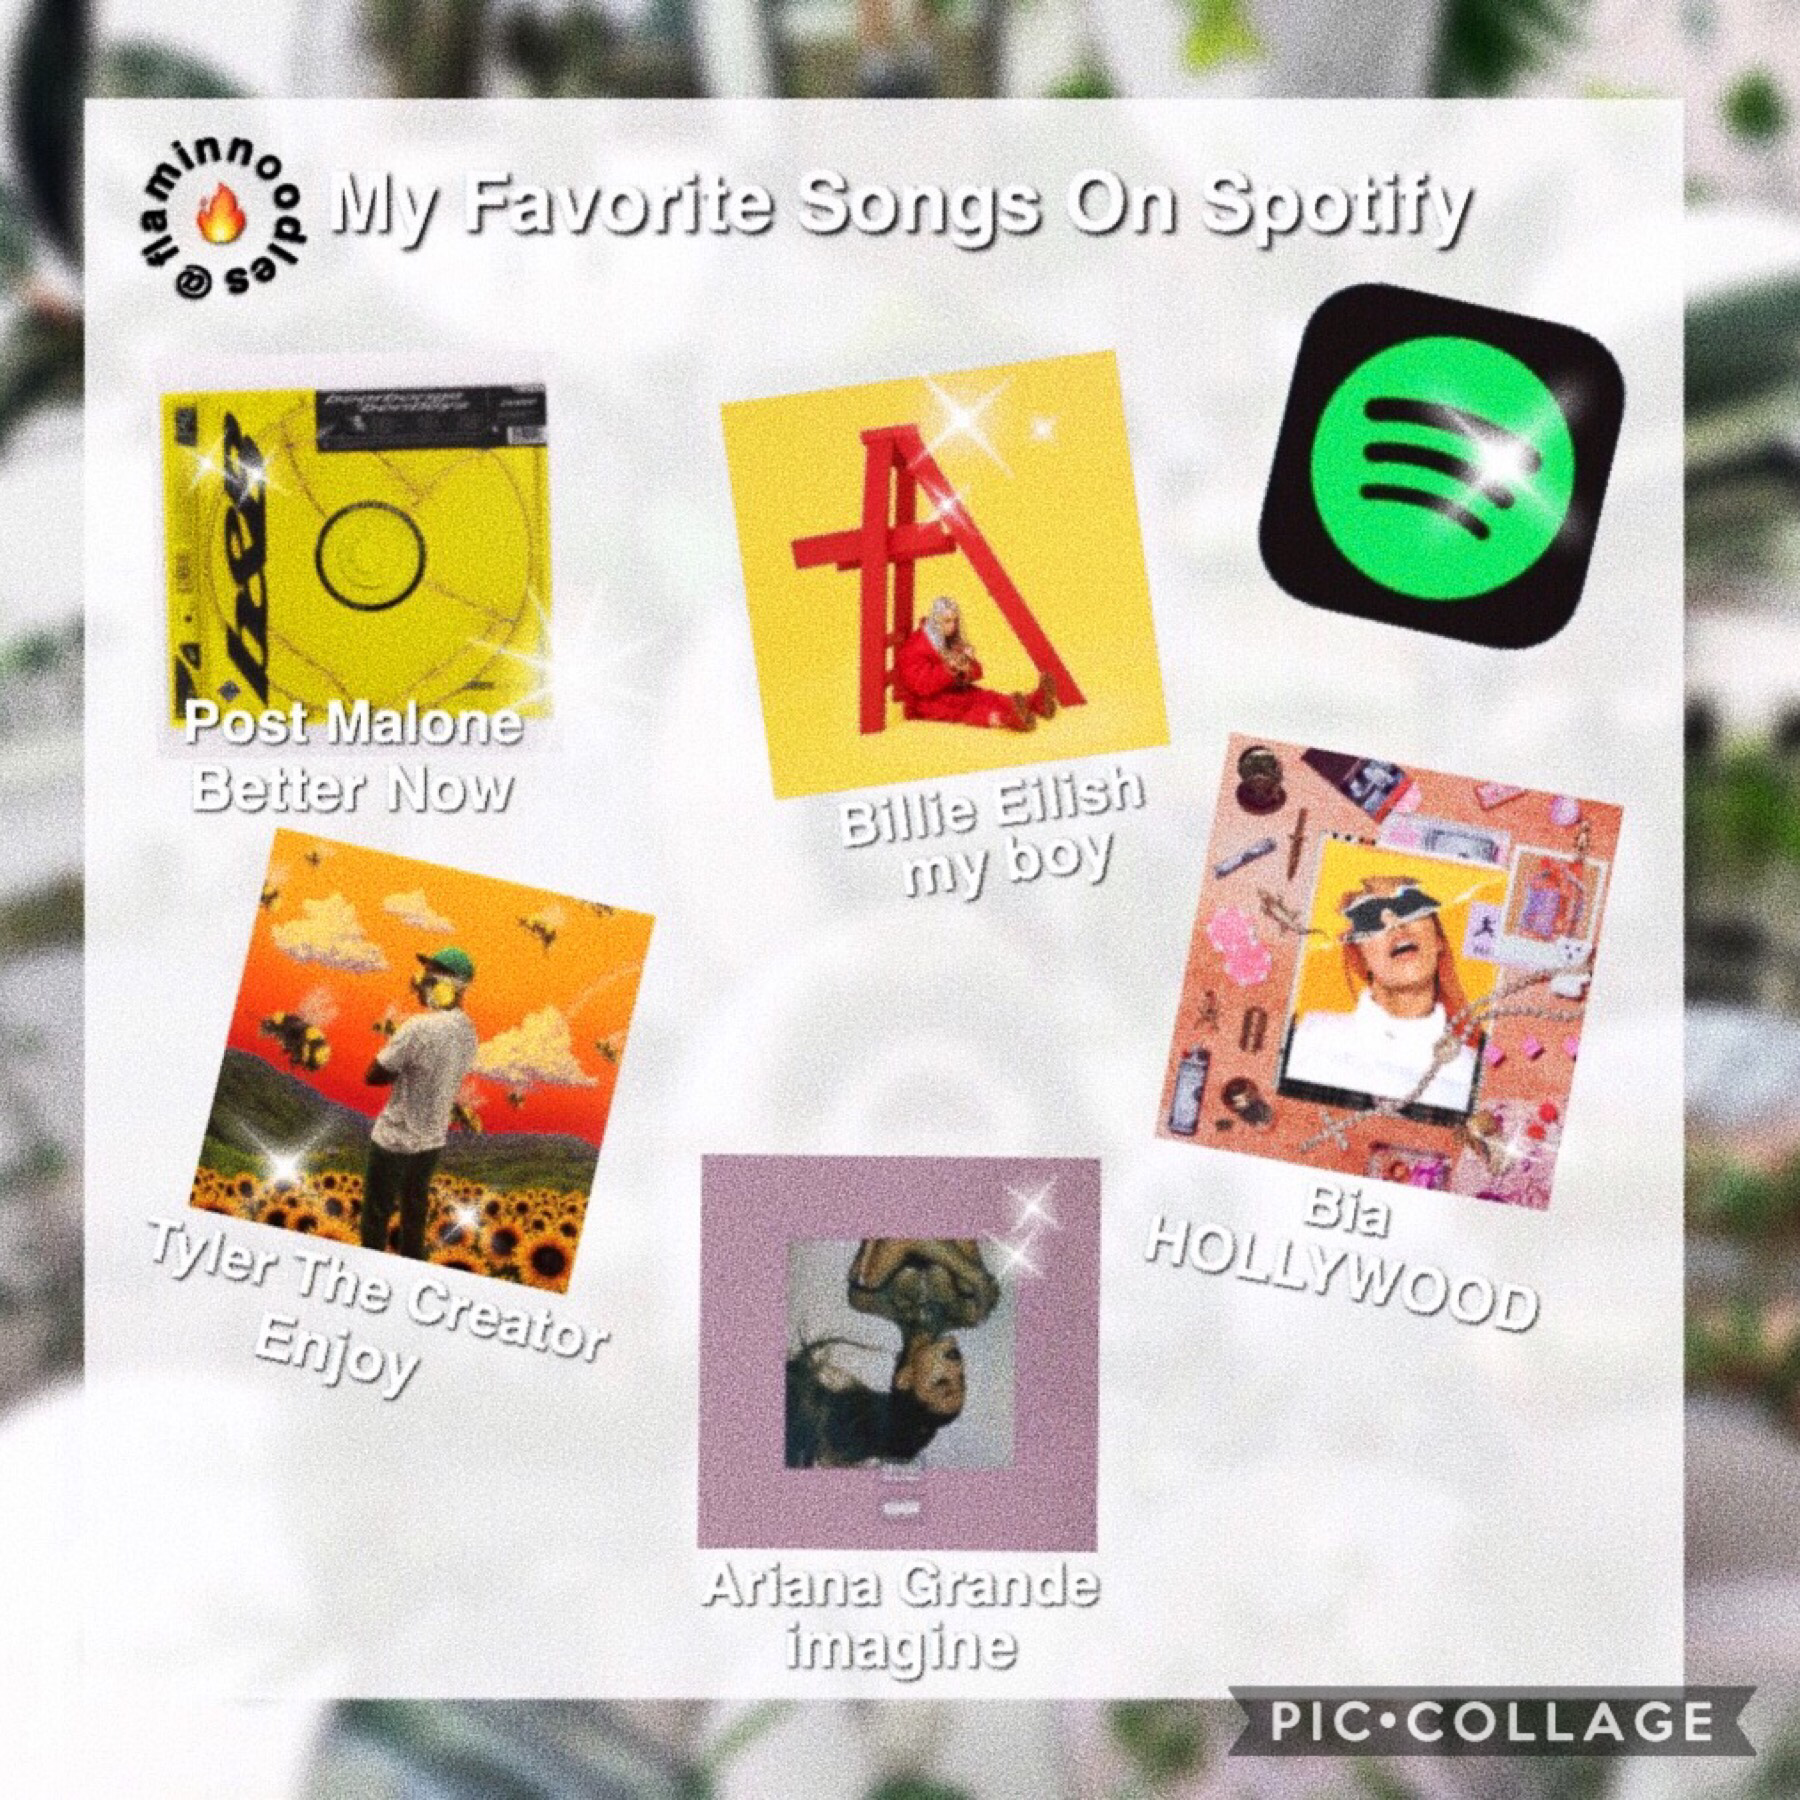 ✨ 𝐓𝐚𝐩 ✨
Hellooooo! I know I posting a little later than usually but at least I posted on Tuesday! :)
- these aren’t all the songs I like just a few (it would be a lot) 
- whats your favorite songs u listen to? 